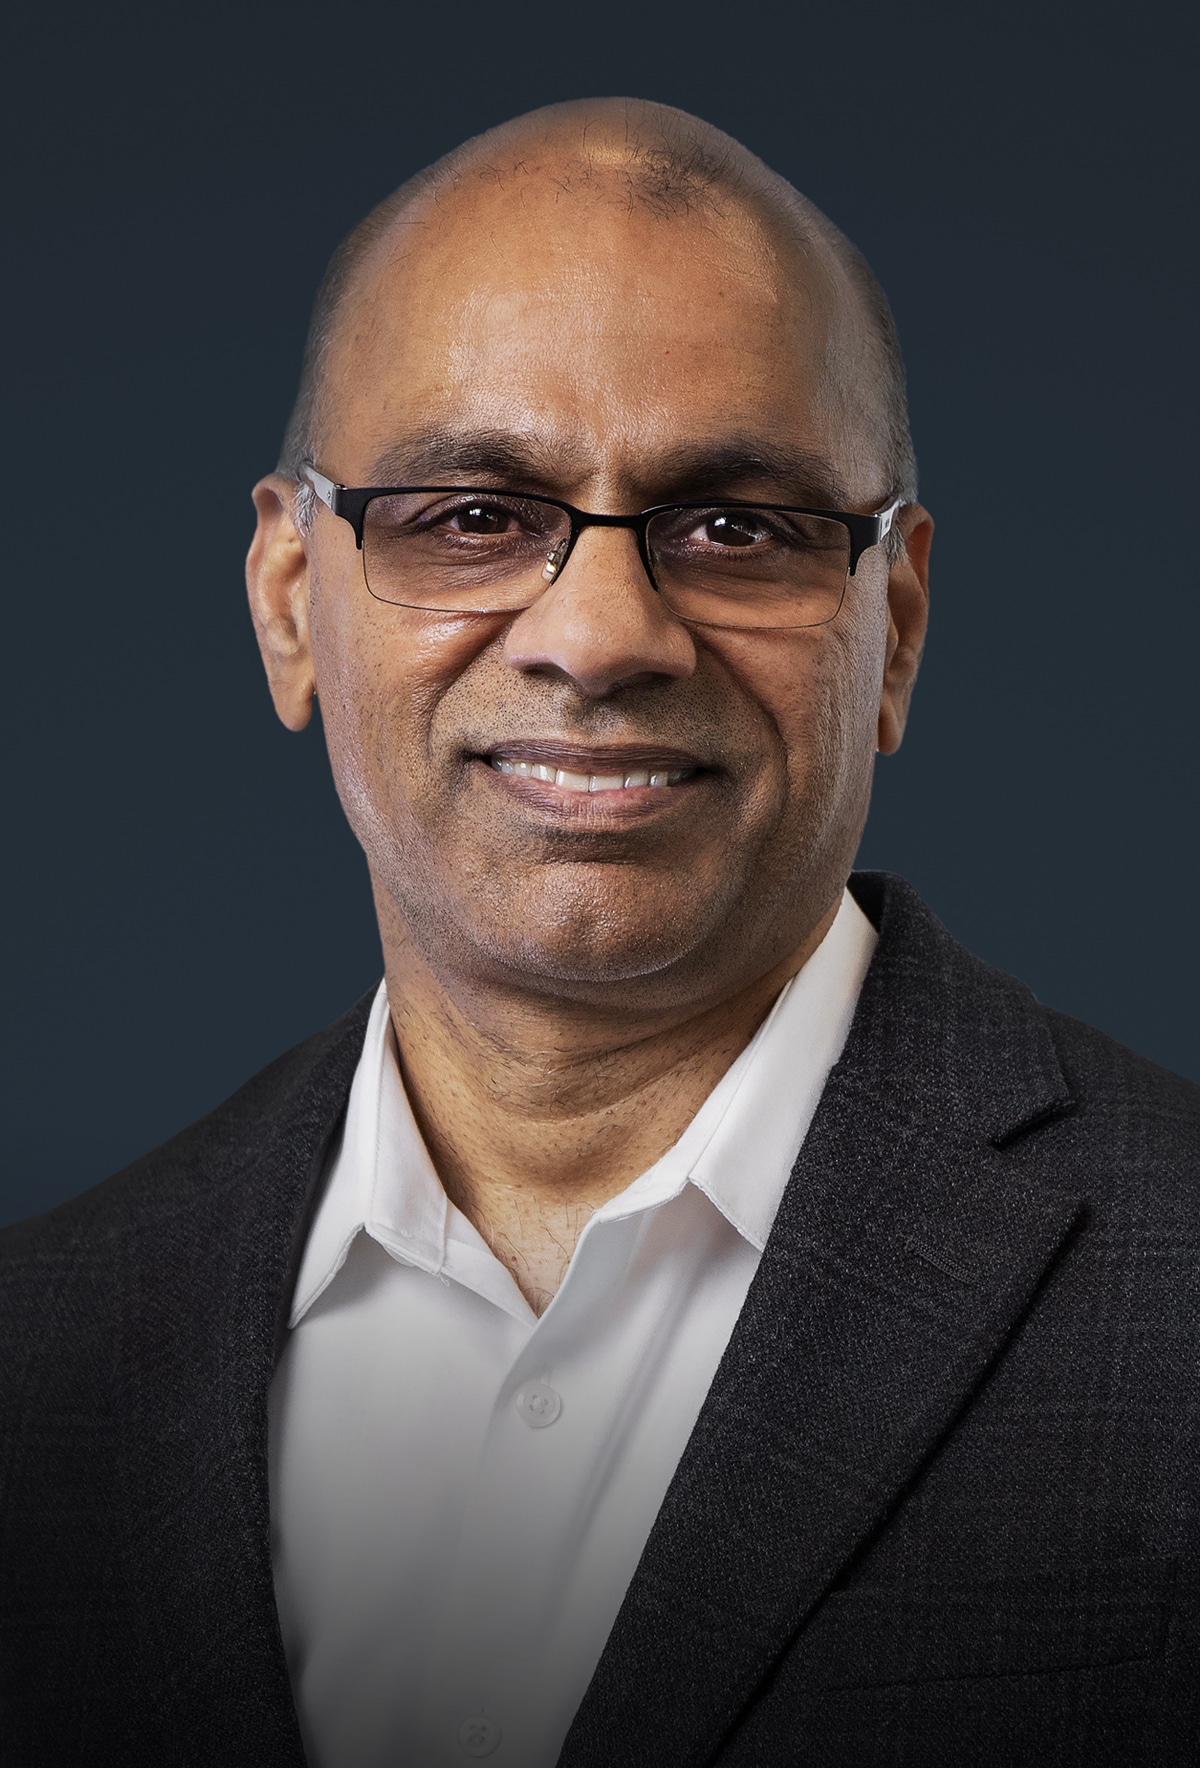 Sudhir Menon, Chief Product Officer